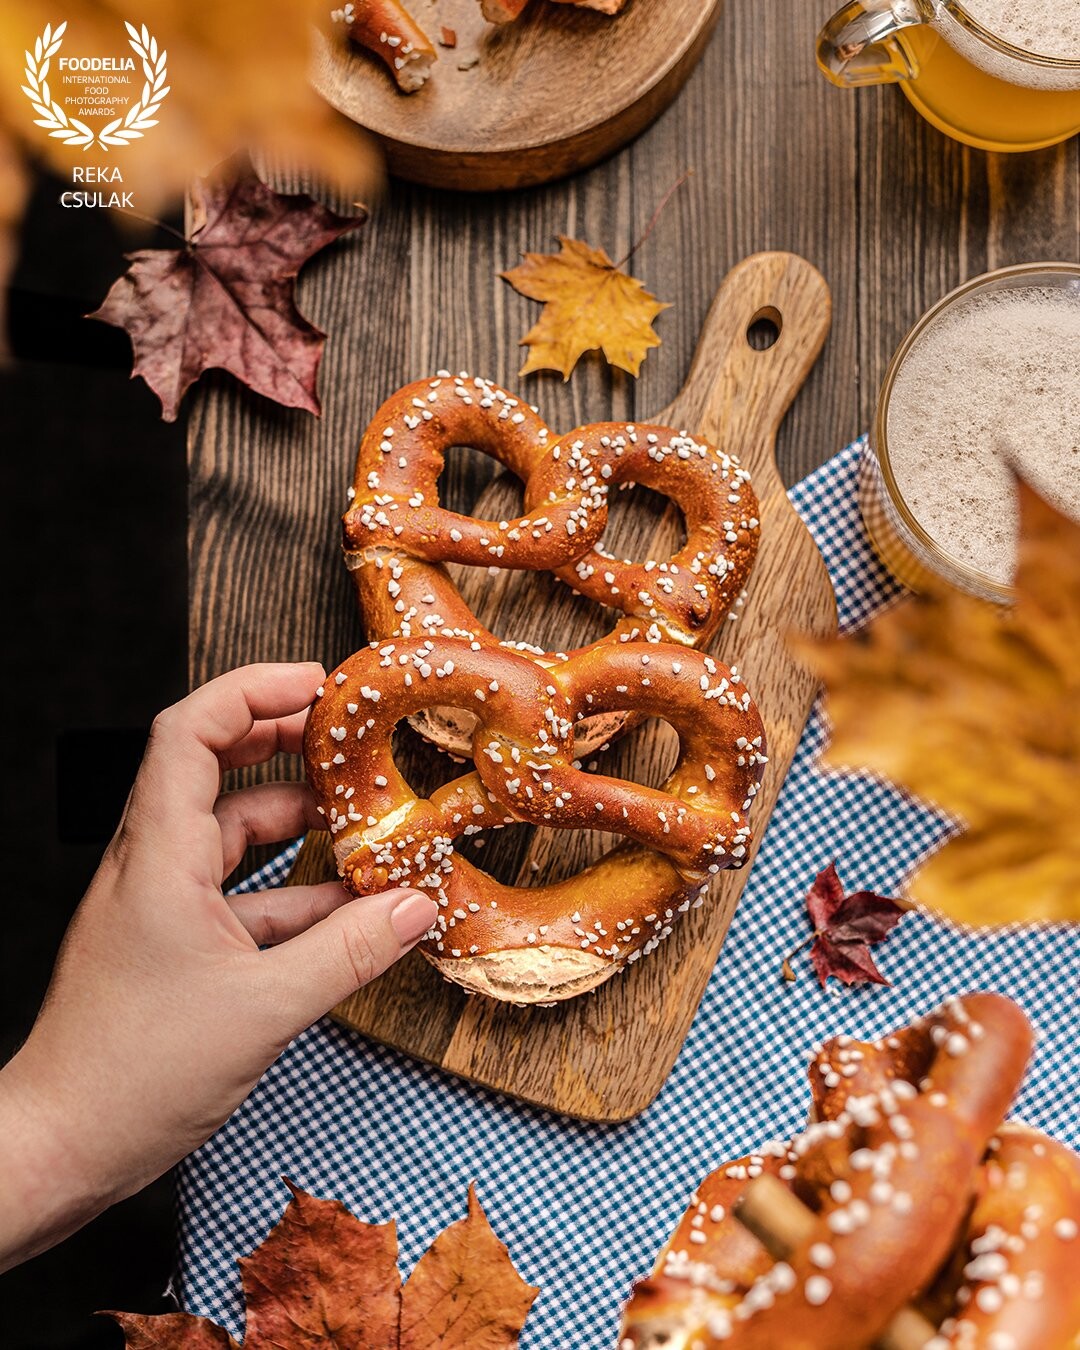 Seasonal photoshoot with Octoberfest vibes, layering for 3-dimensionality using colourful leaves and typical items of a true feast for pretzels and beer.